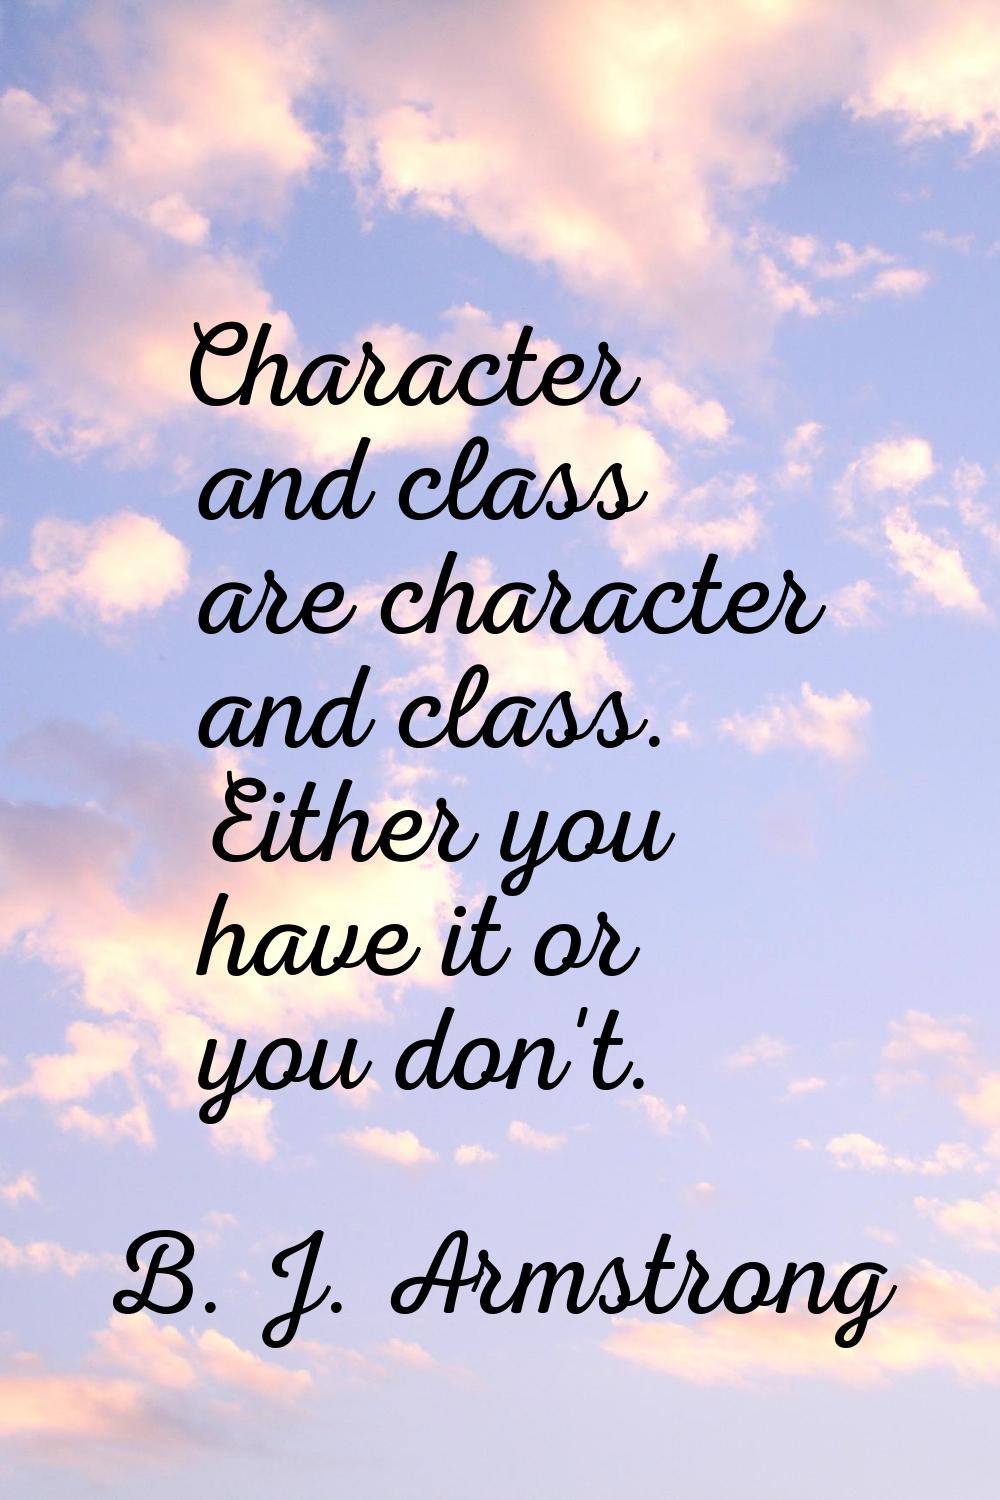 Character and class are character and class. Either you have it or you don't.